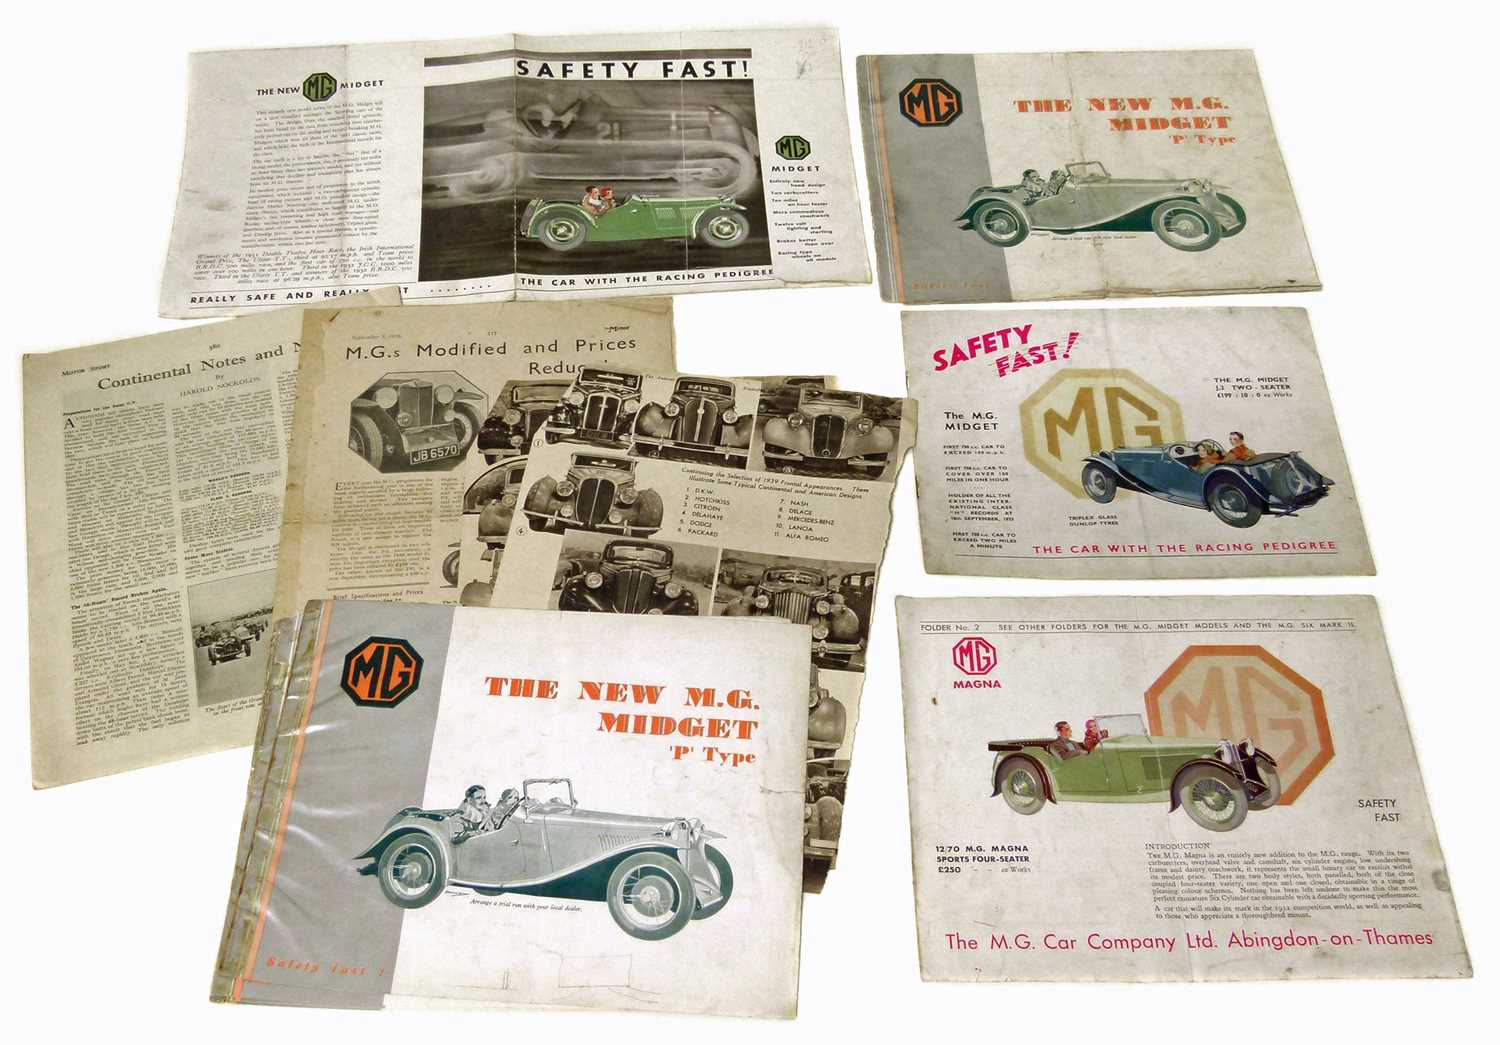 1933 promotional brochure for MG Magna Sports four-seater